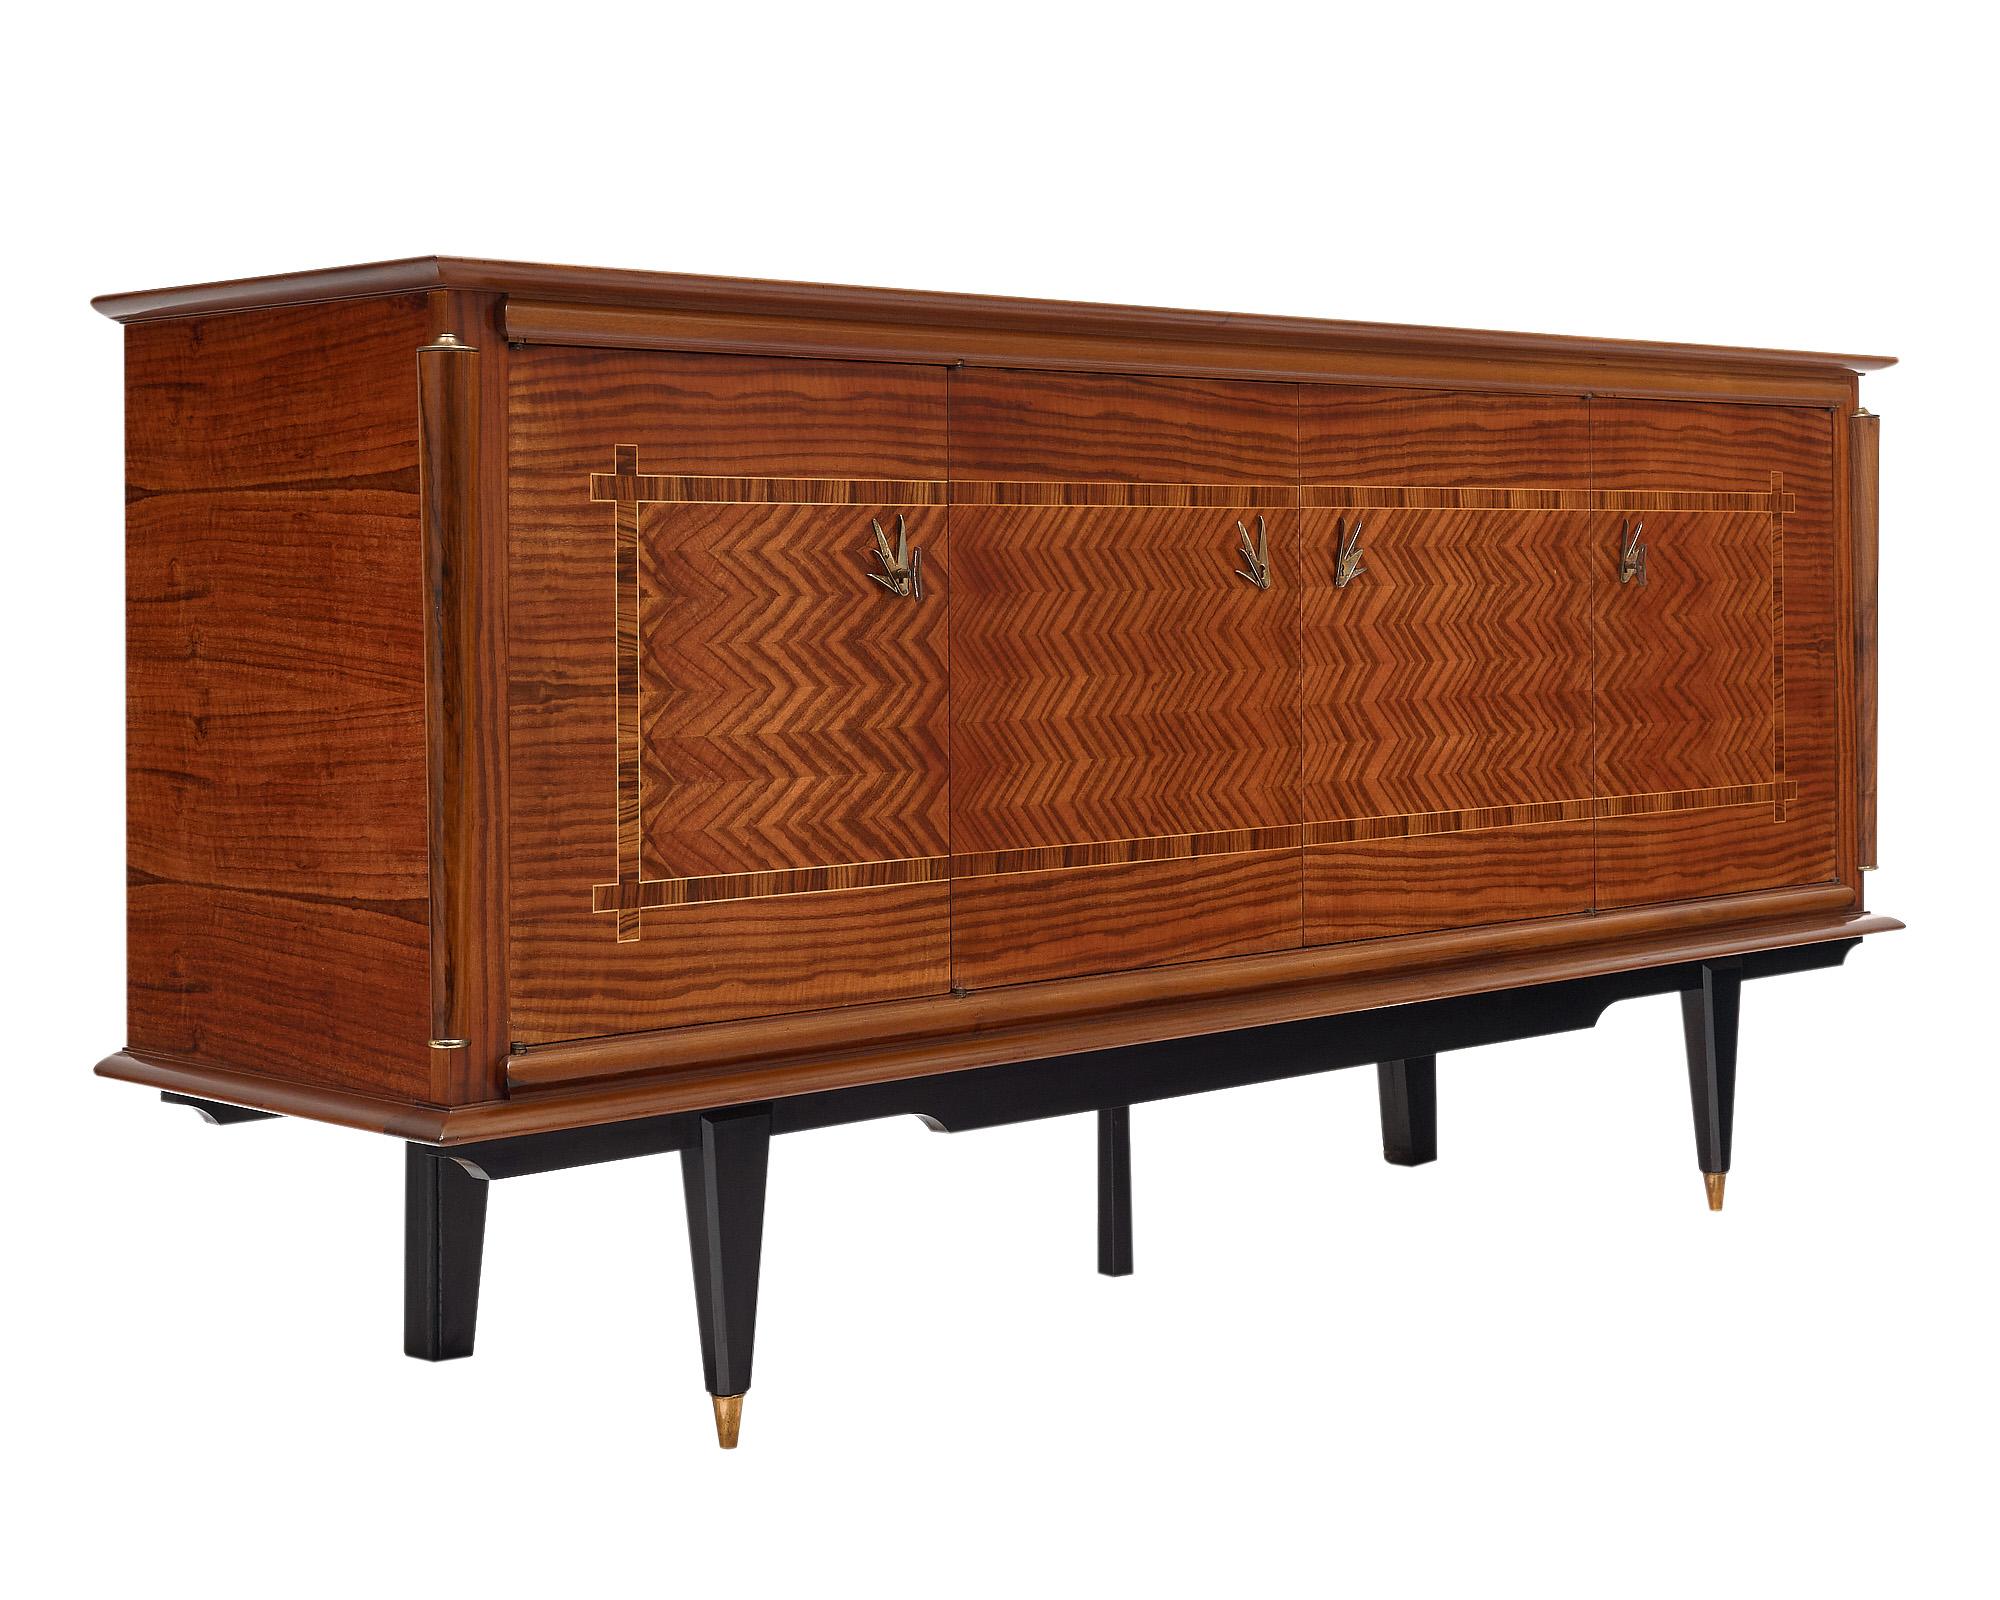 Credenza / Buffet from France. It is in the mid-century modern style with a striking chevron marquetry across the facade. The enfilade is supported by ebonized legs, the front two featuring brass feet. The four doors open up to interior shelving and